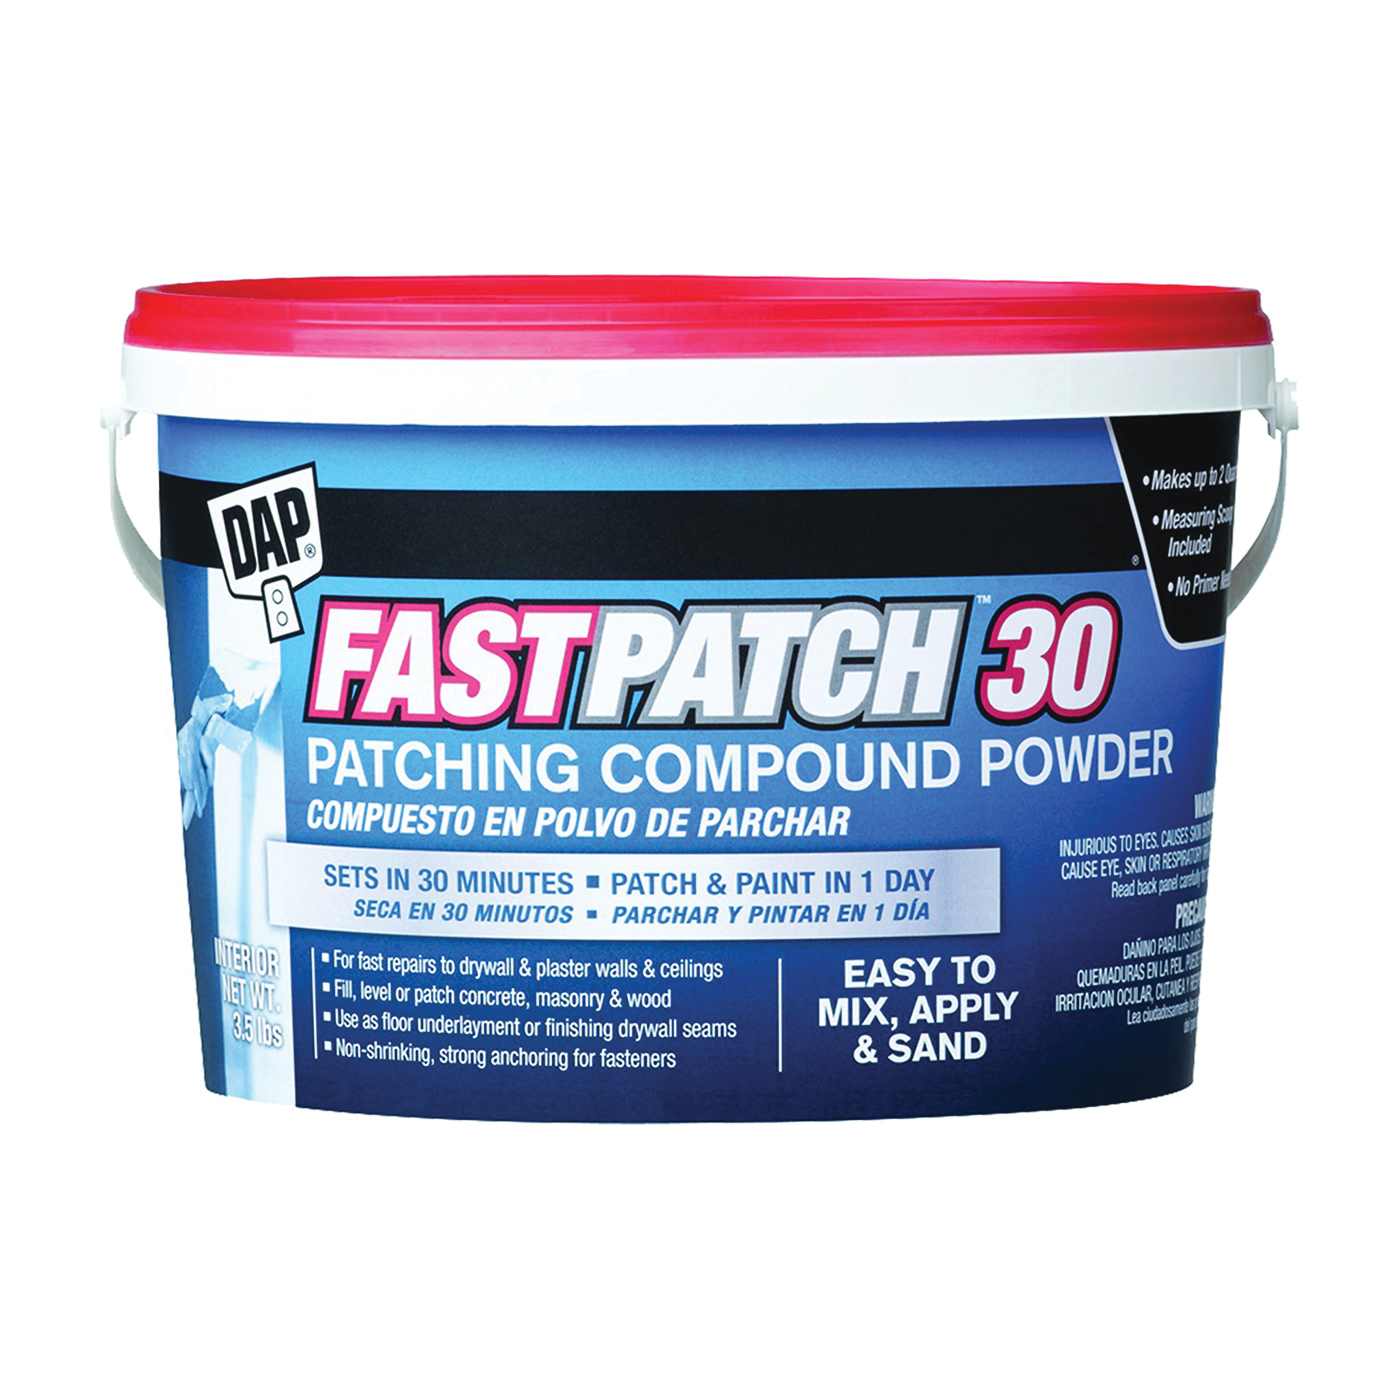 FASTPATCH 58550 Patching Compound, White, 3.5 lb Tub